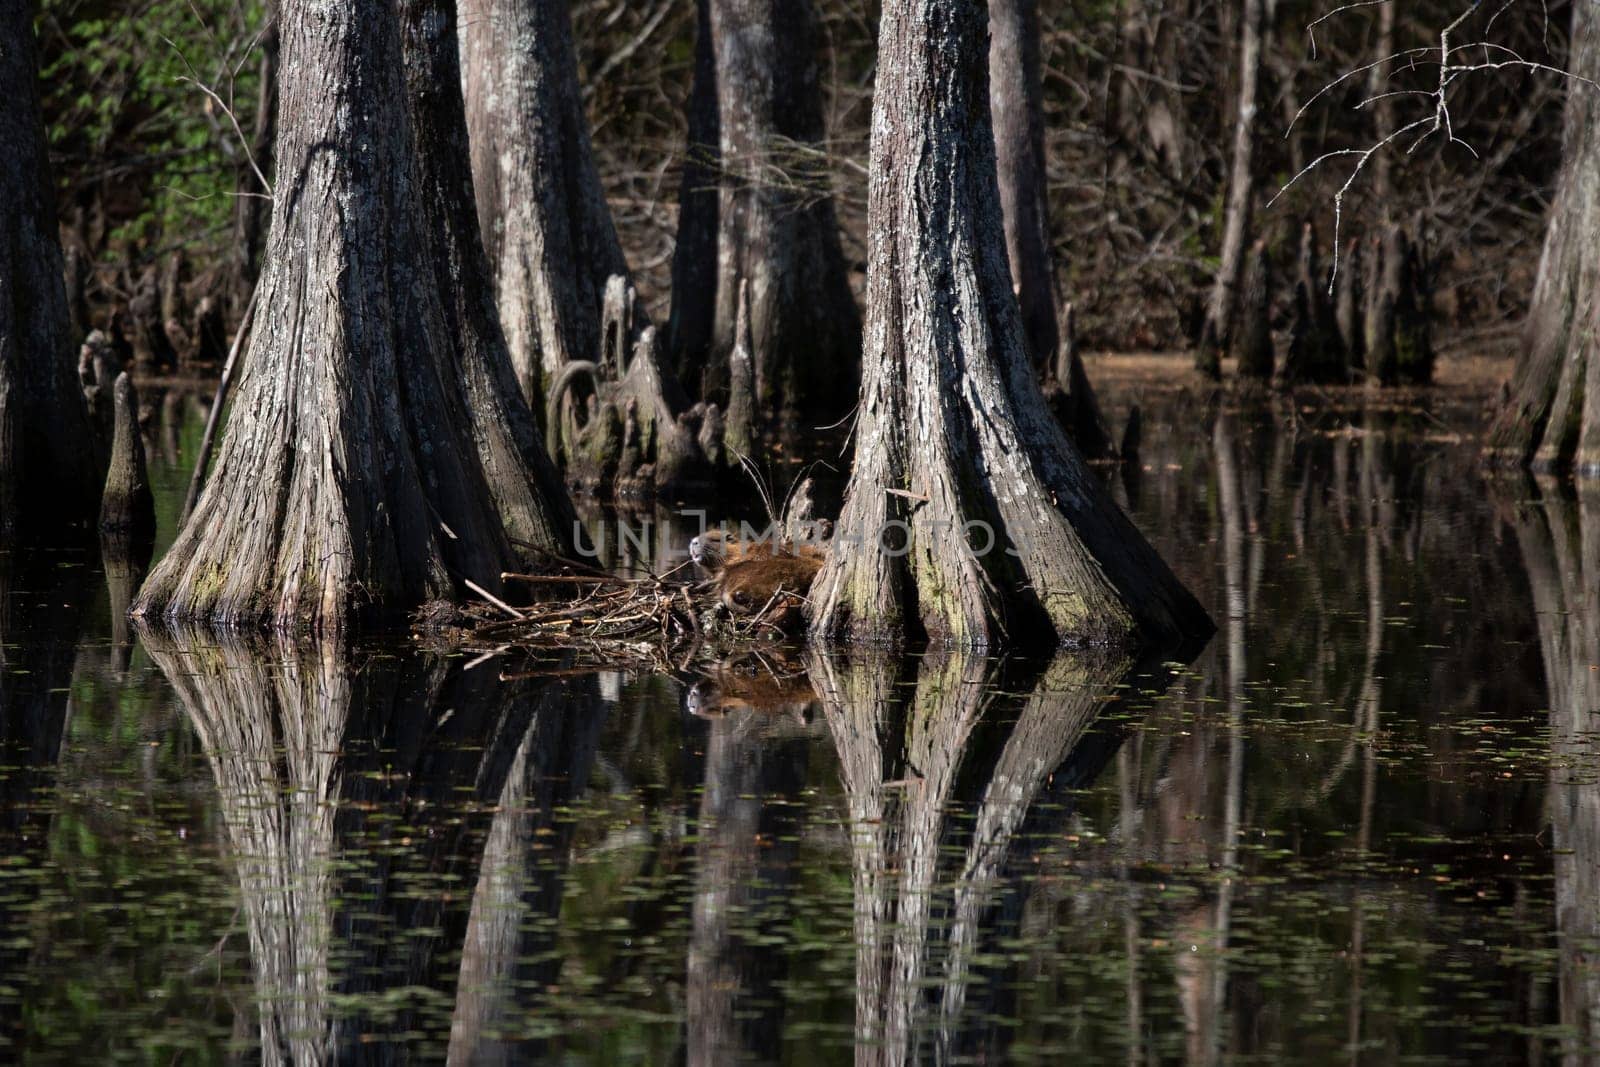 One nutria (Myocastor coypus) waking from its nap while others rest nearby